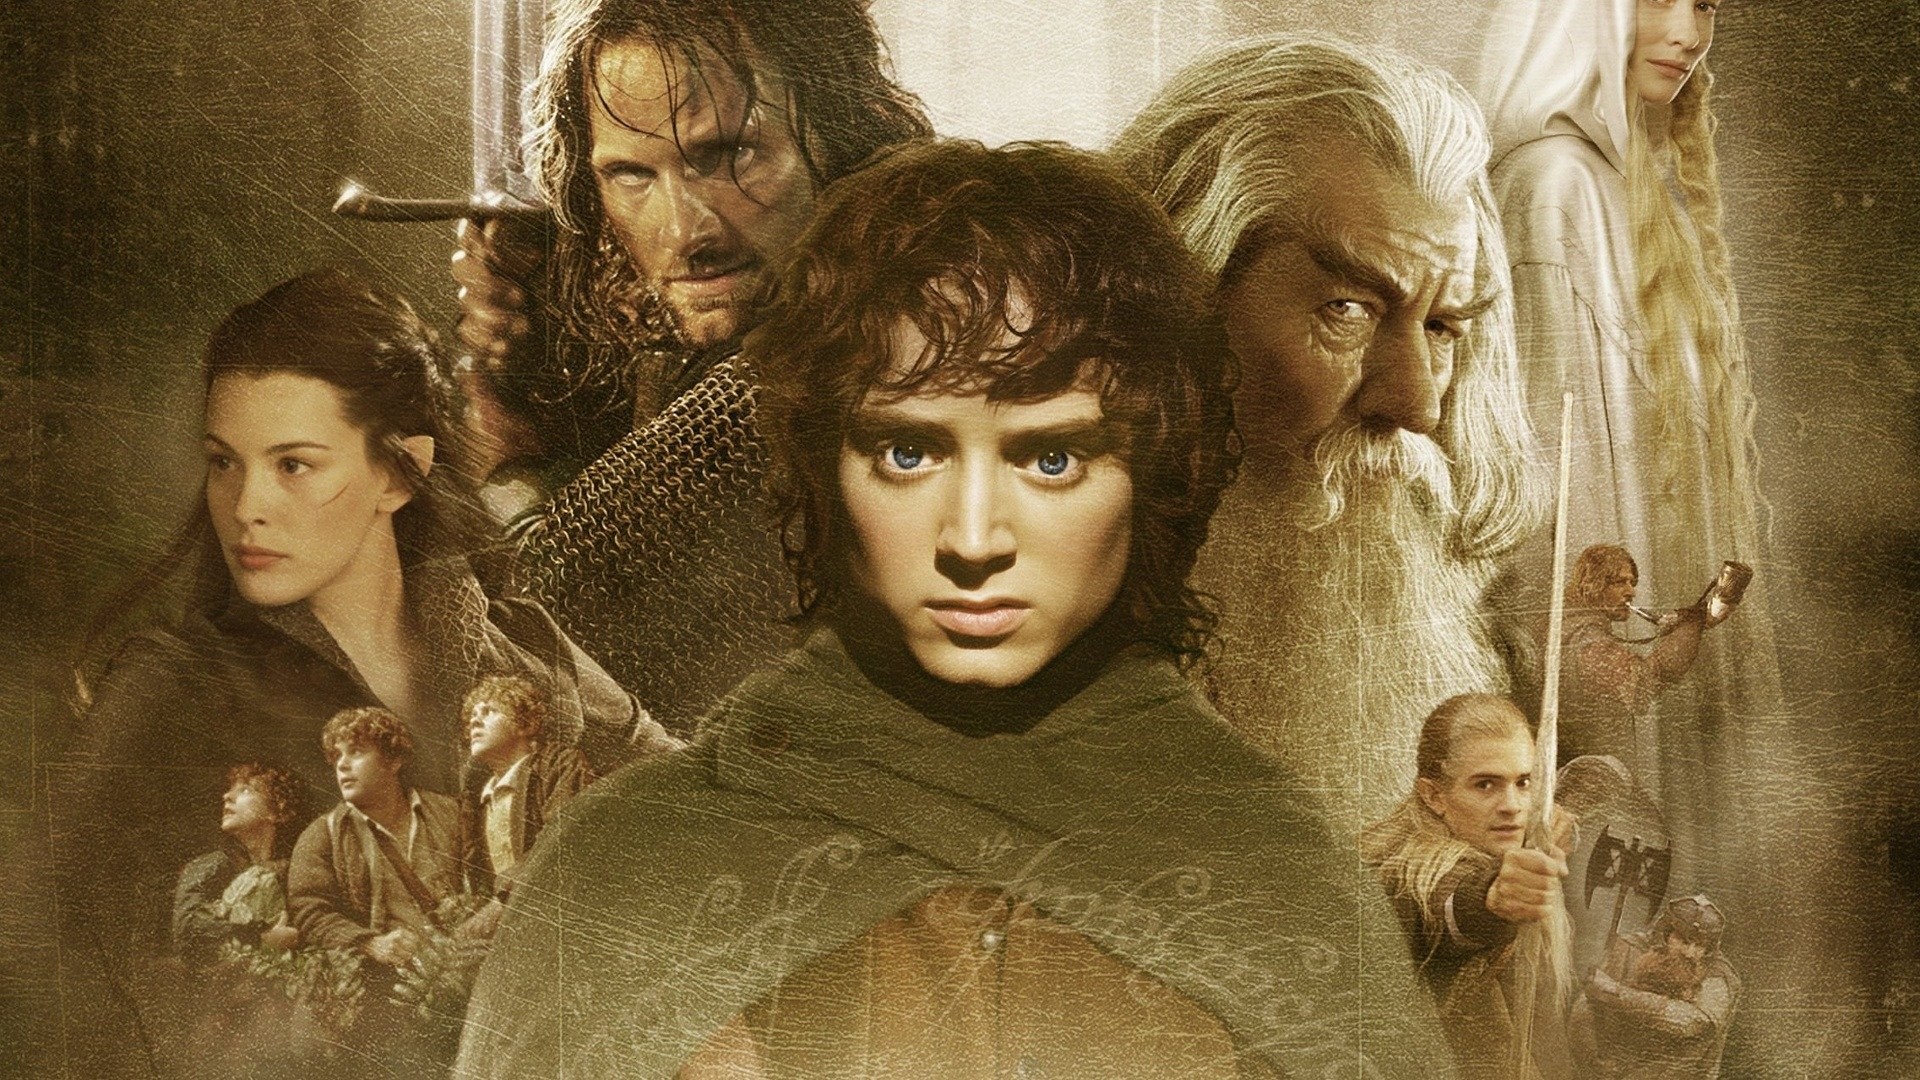 Lord of the Rings: Fellowship of the ring trailer 